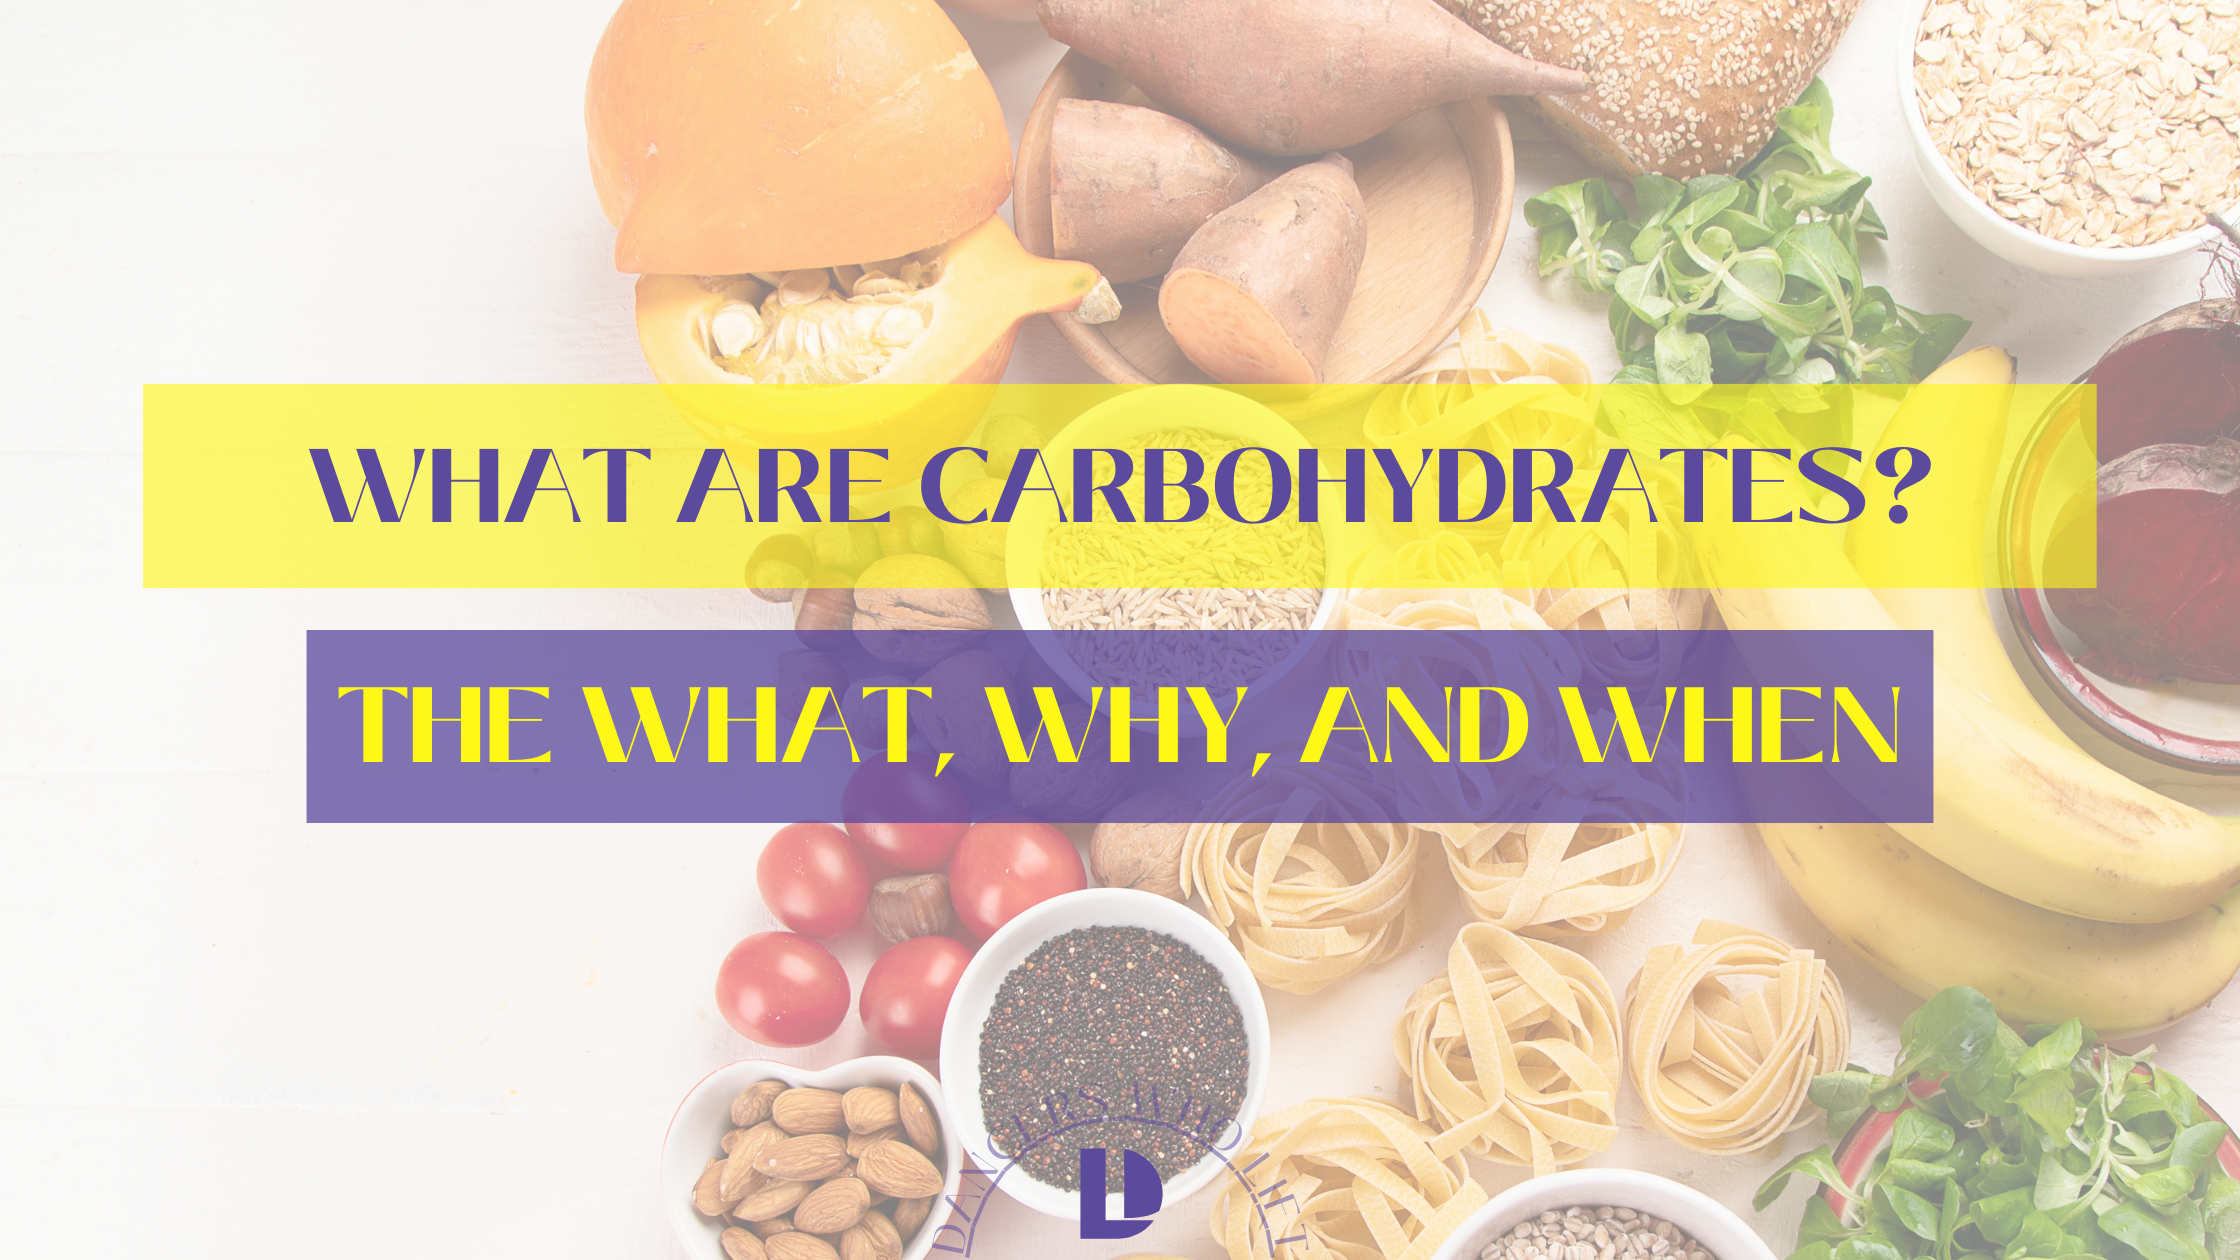 what are carbohydrates?